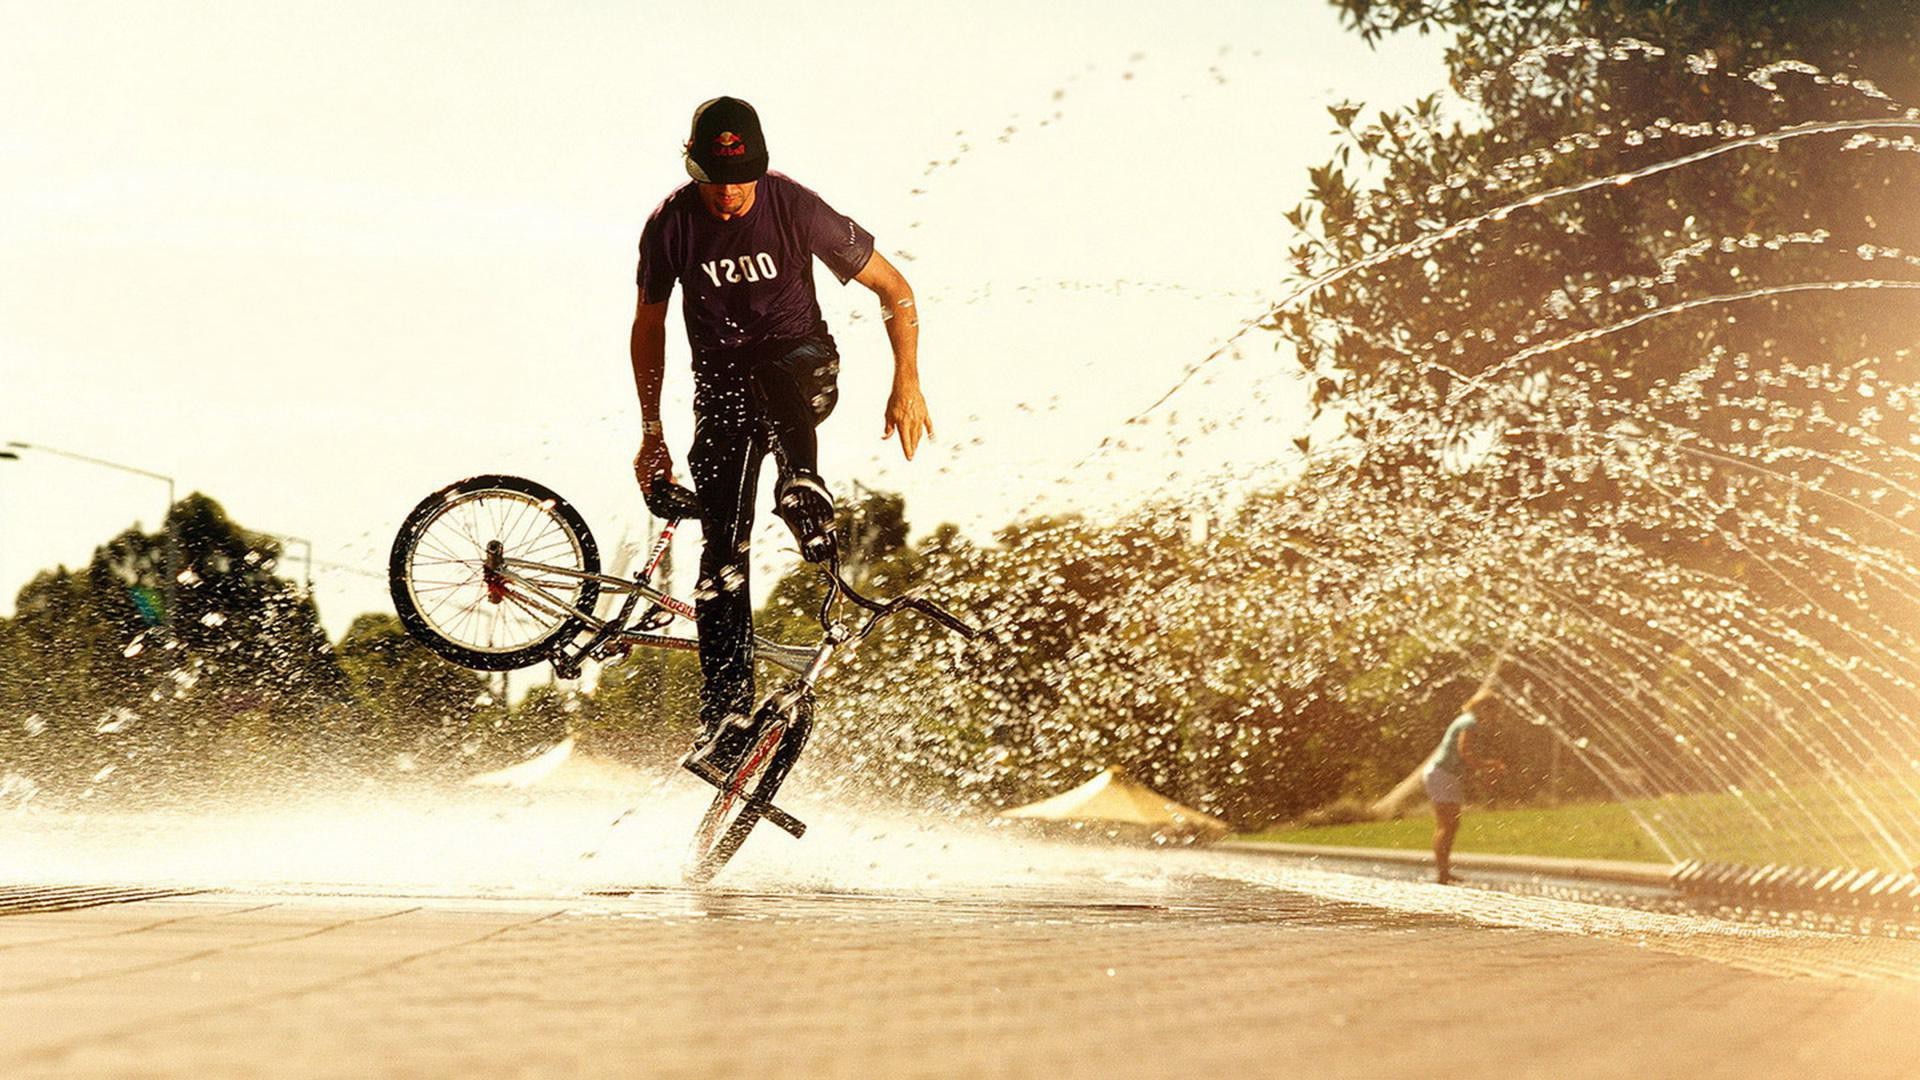 bmx wallpaper hd,sports,cycle sport,cycling,freestyle bmx,bicycle